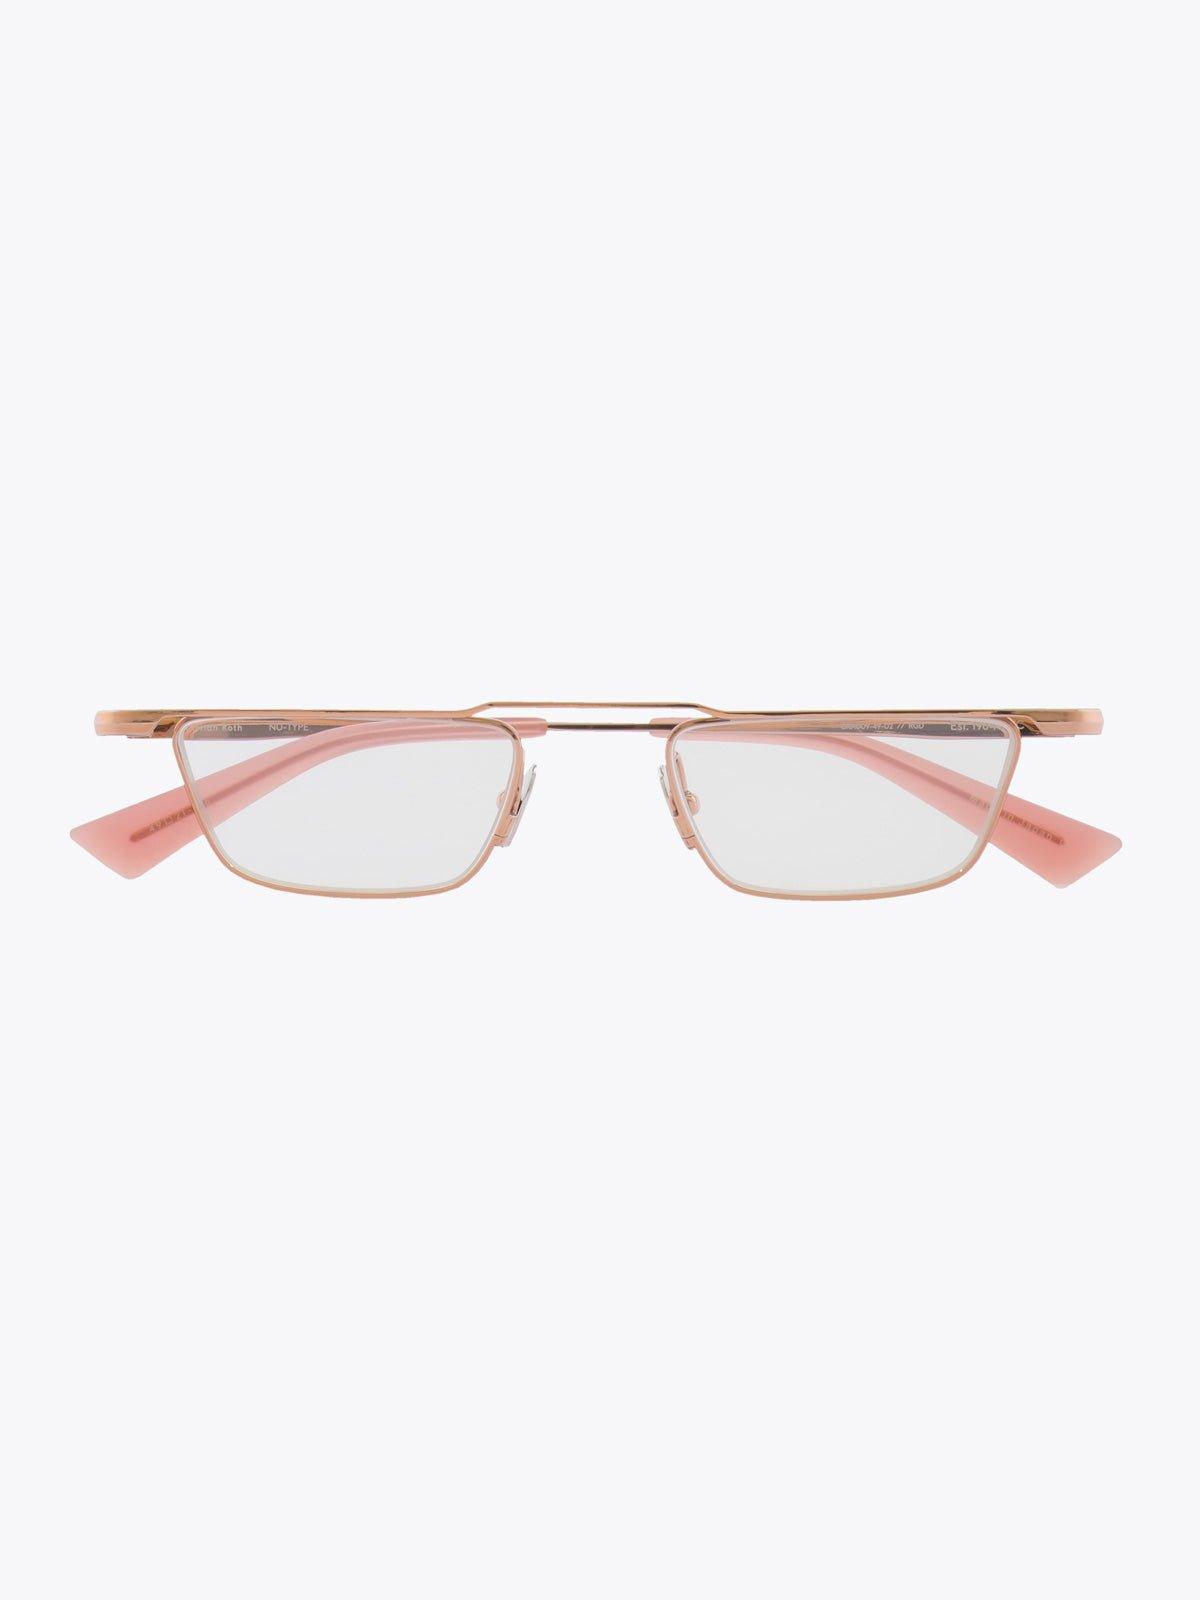 CHRISTIAN ROTH Nu-Type Rose Gold Optische Brille